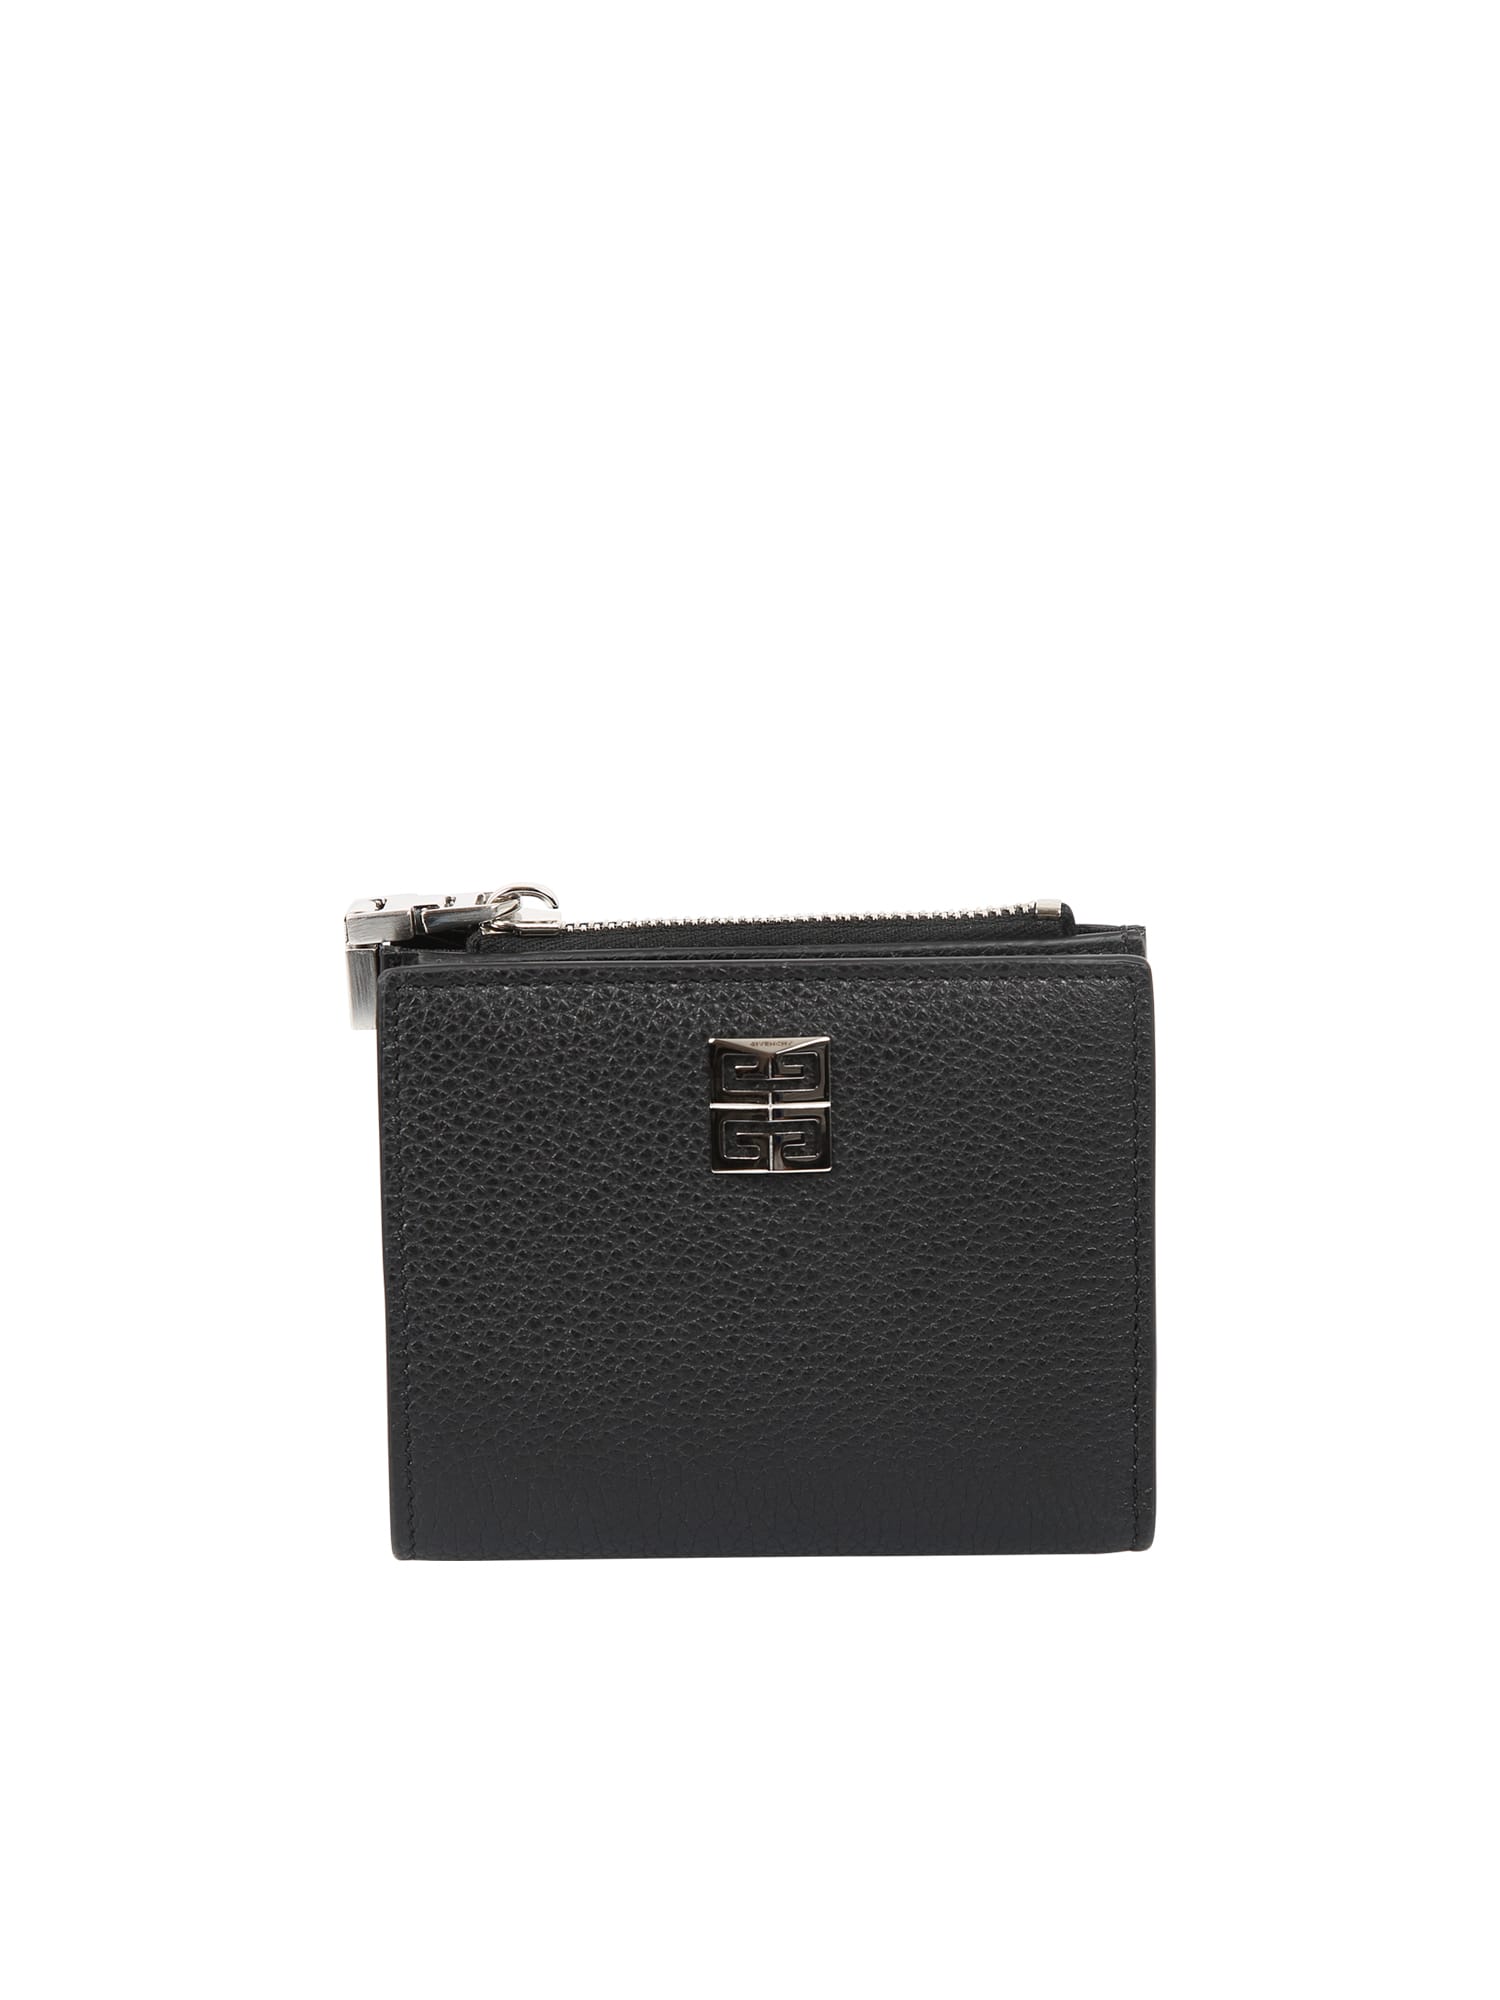 Givenchy Compact Cardholder